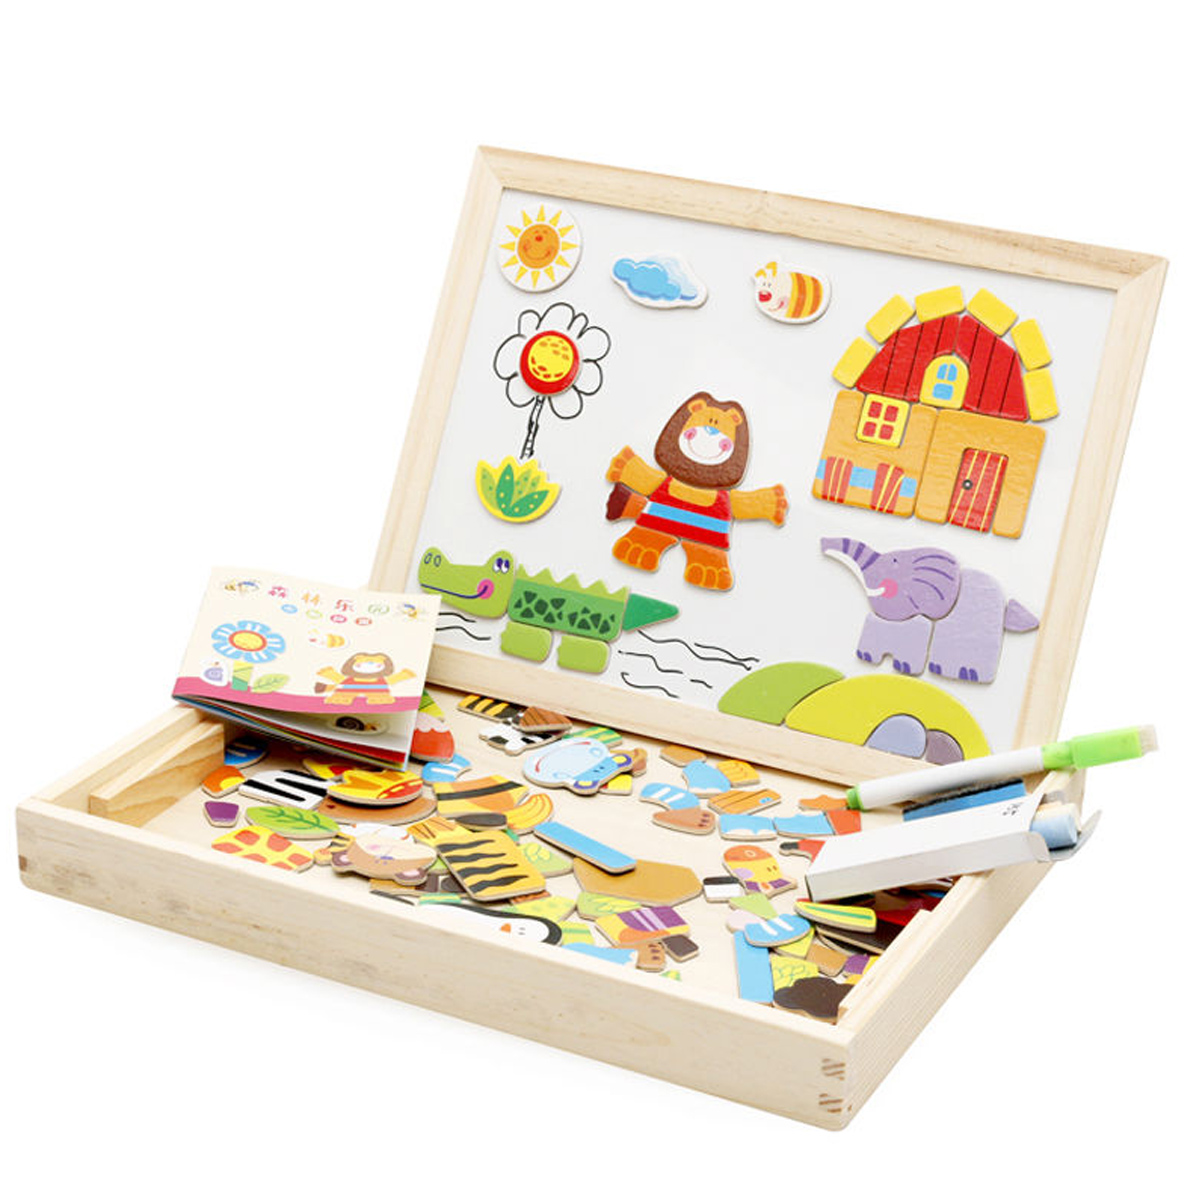 Wooden-DIY-Magnetic-Drawing-Board-Forest-Paradise-Childrens-Early-Educational-Learning-Toys-1676971-4